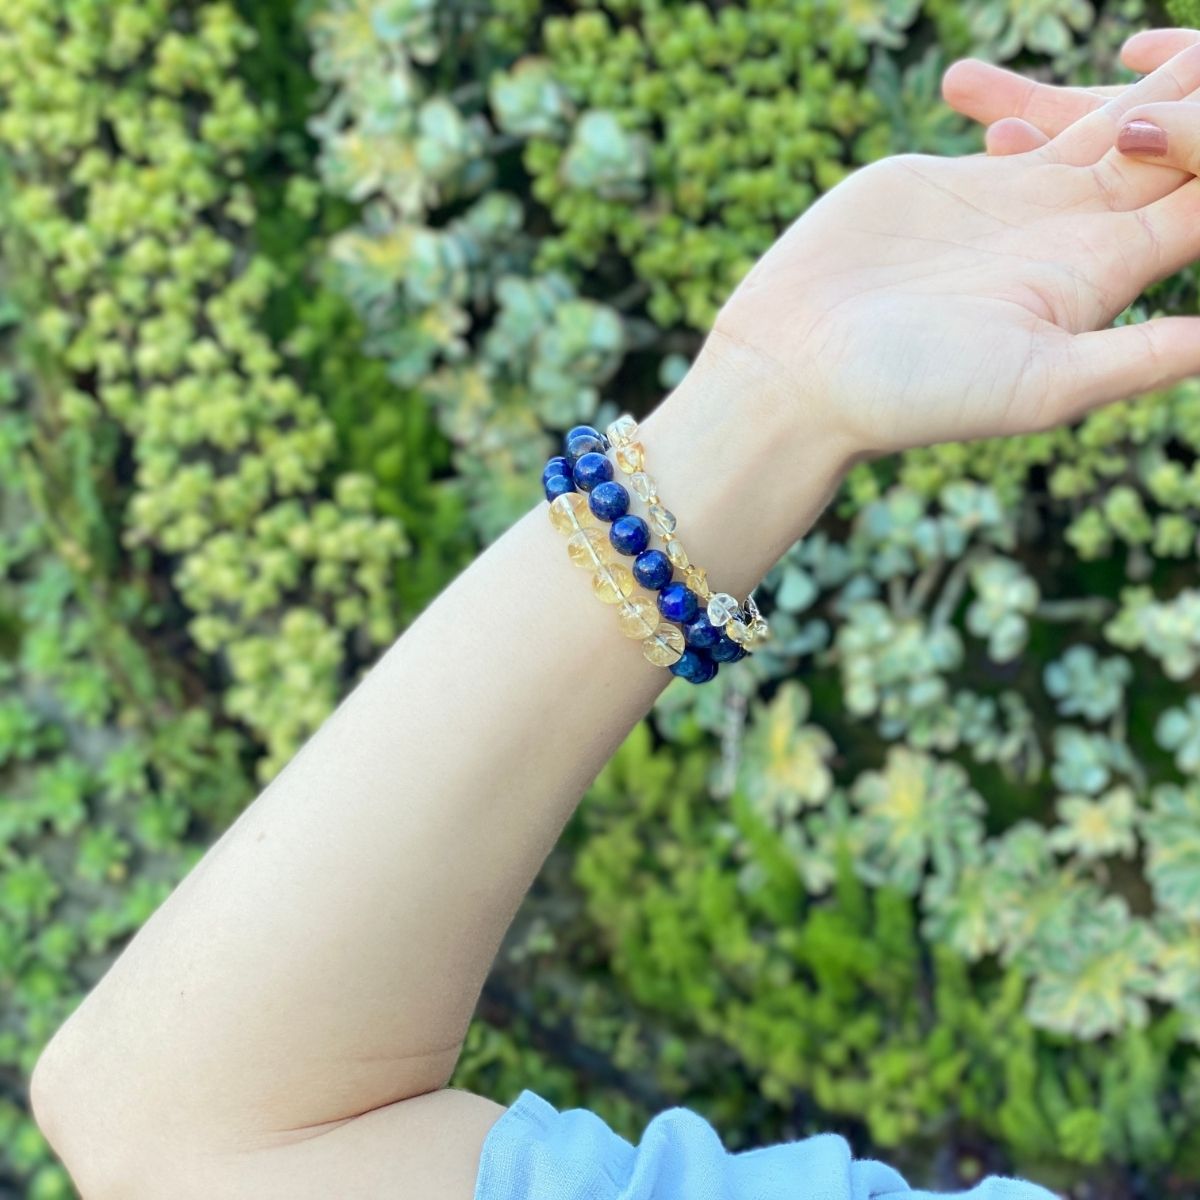 Optimism Bracelet Stack. To find optimism, look for the good things in life. Optimism makes your life happier and more meaningful. Wear these crystals to boost optimism!  Lapis Lazuli and Citrine Bracelet to bring Self-Awareness Best crystals for self-awareness. Lapis Lazuli jewelry  is a symbol of truth.